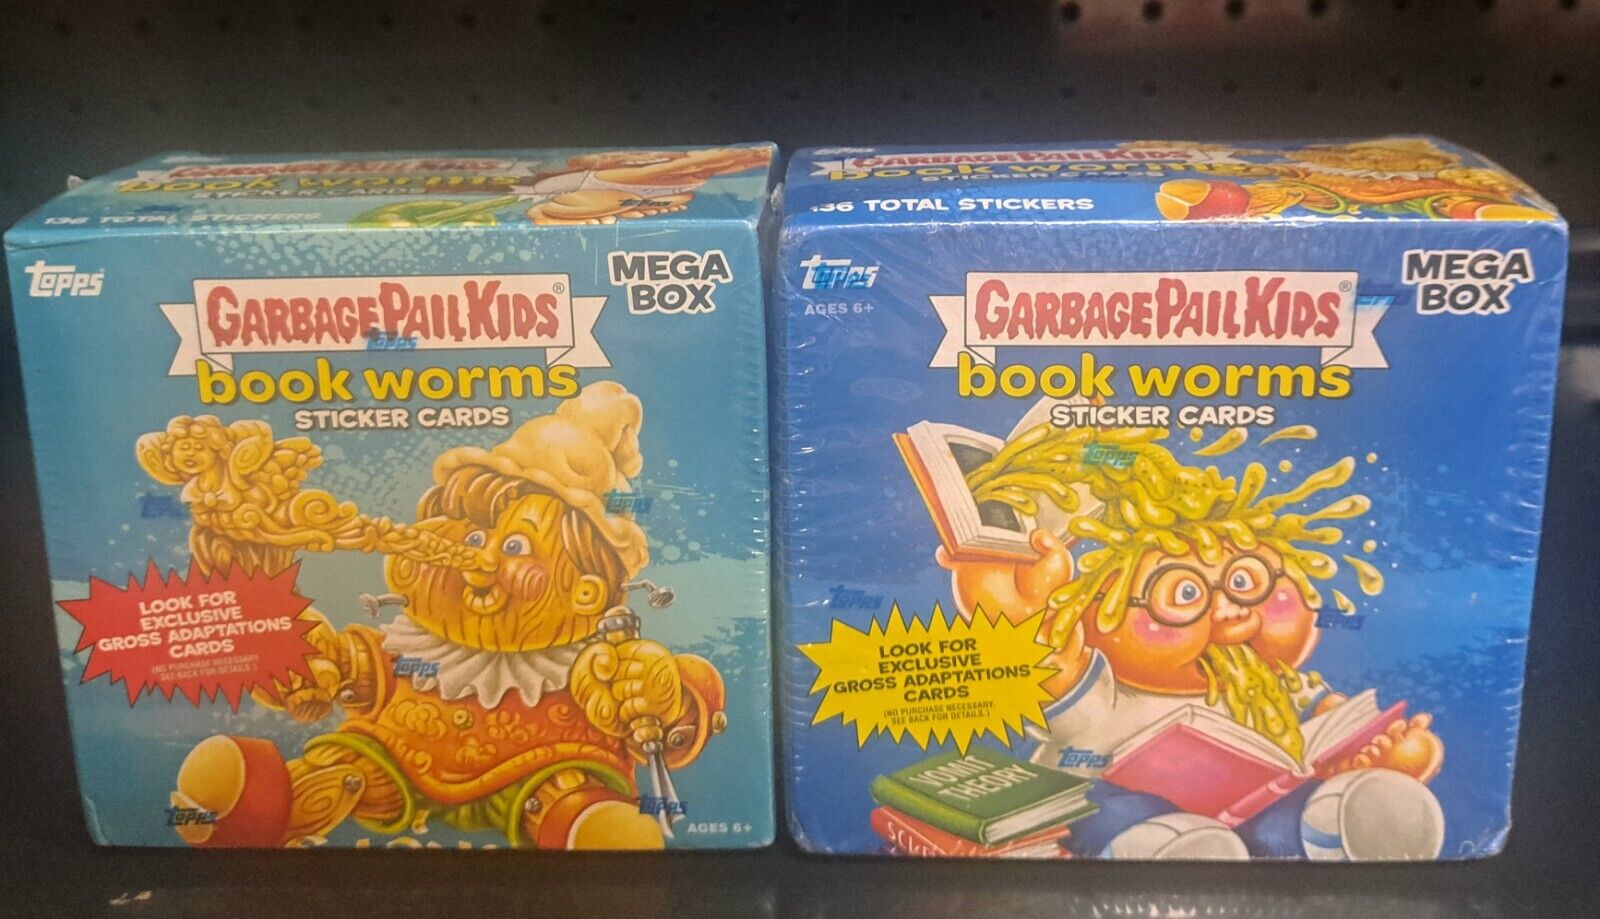 Two Boxes Of Garbage Pail Kids Book Worms Stickers 2022 New In Boxes Mega Box